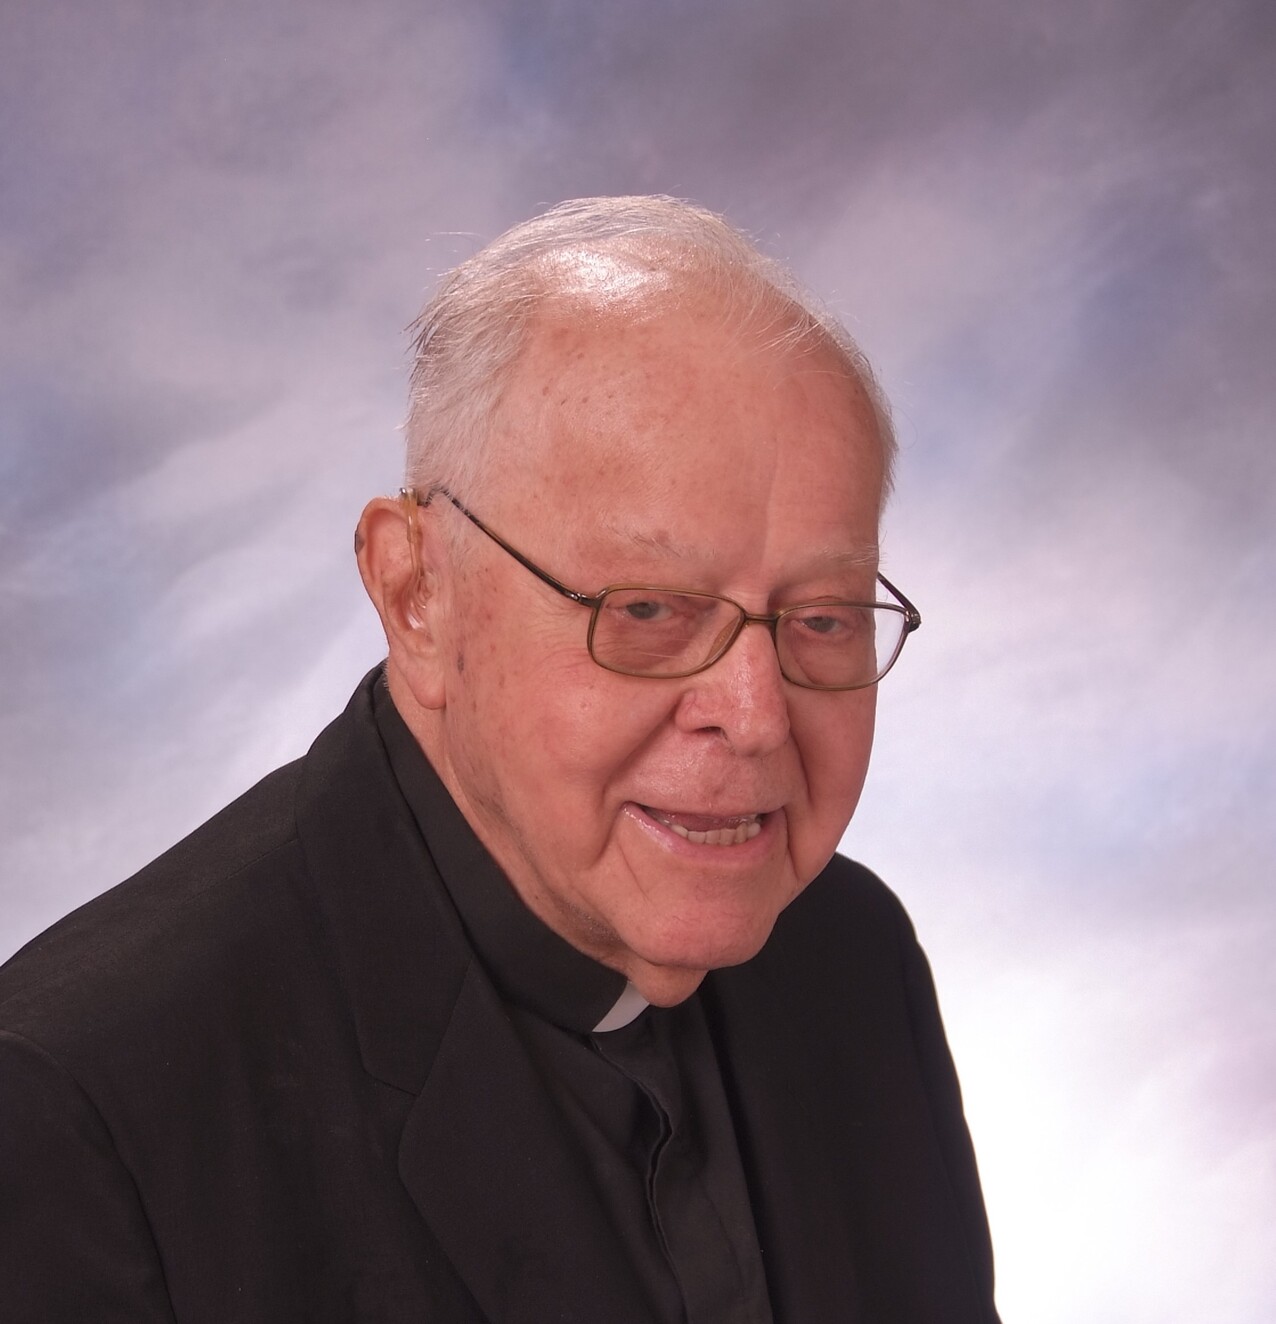 In remembrance – Father James J. Vesely